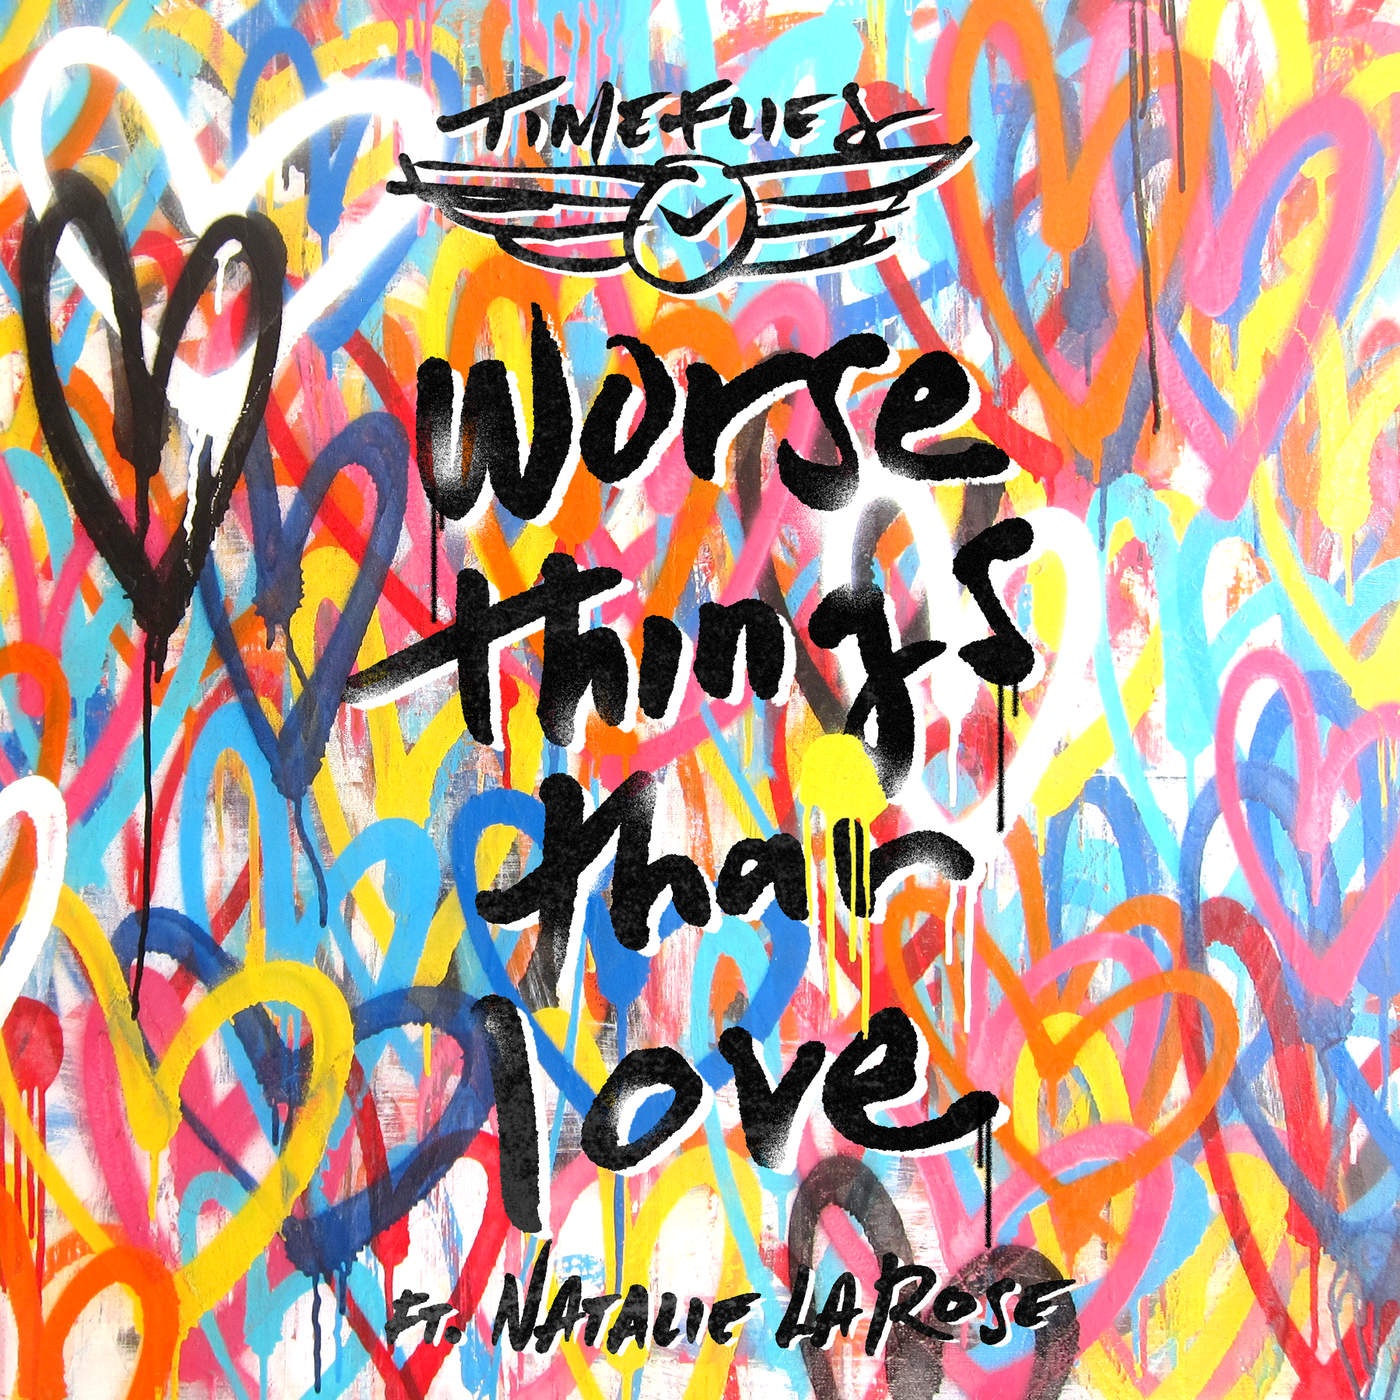 Worse Things Than Love(feat.Natalie La Rose)